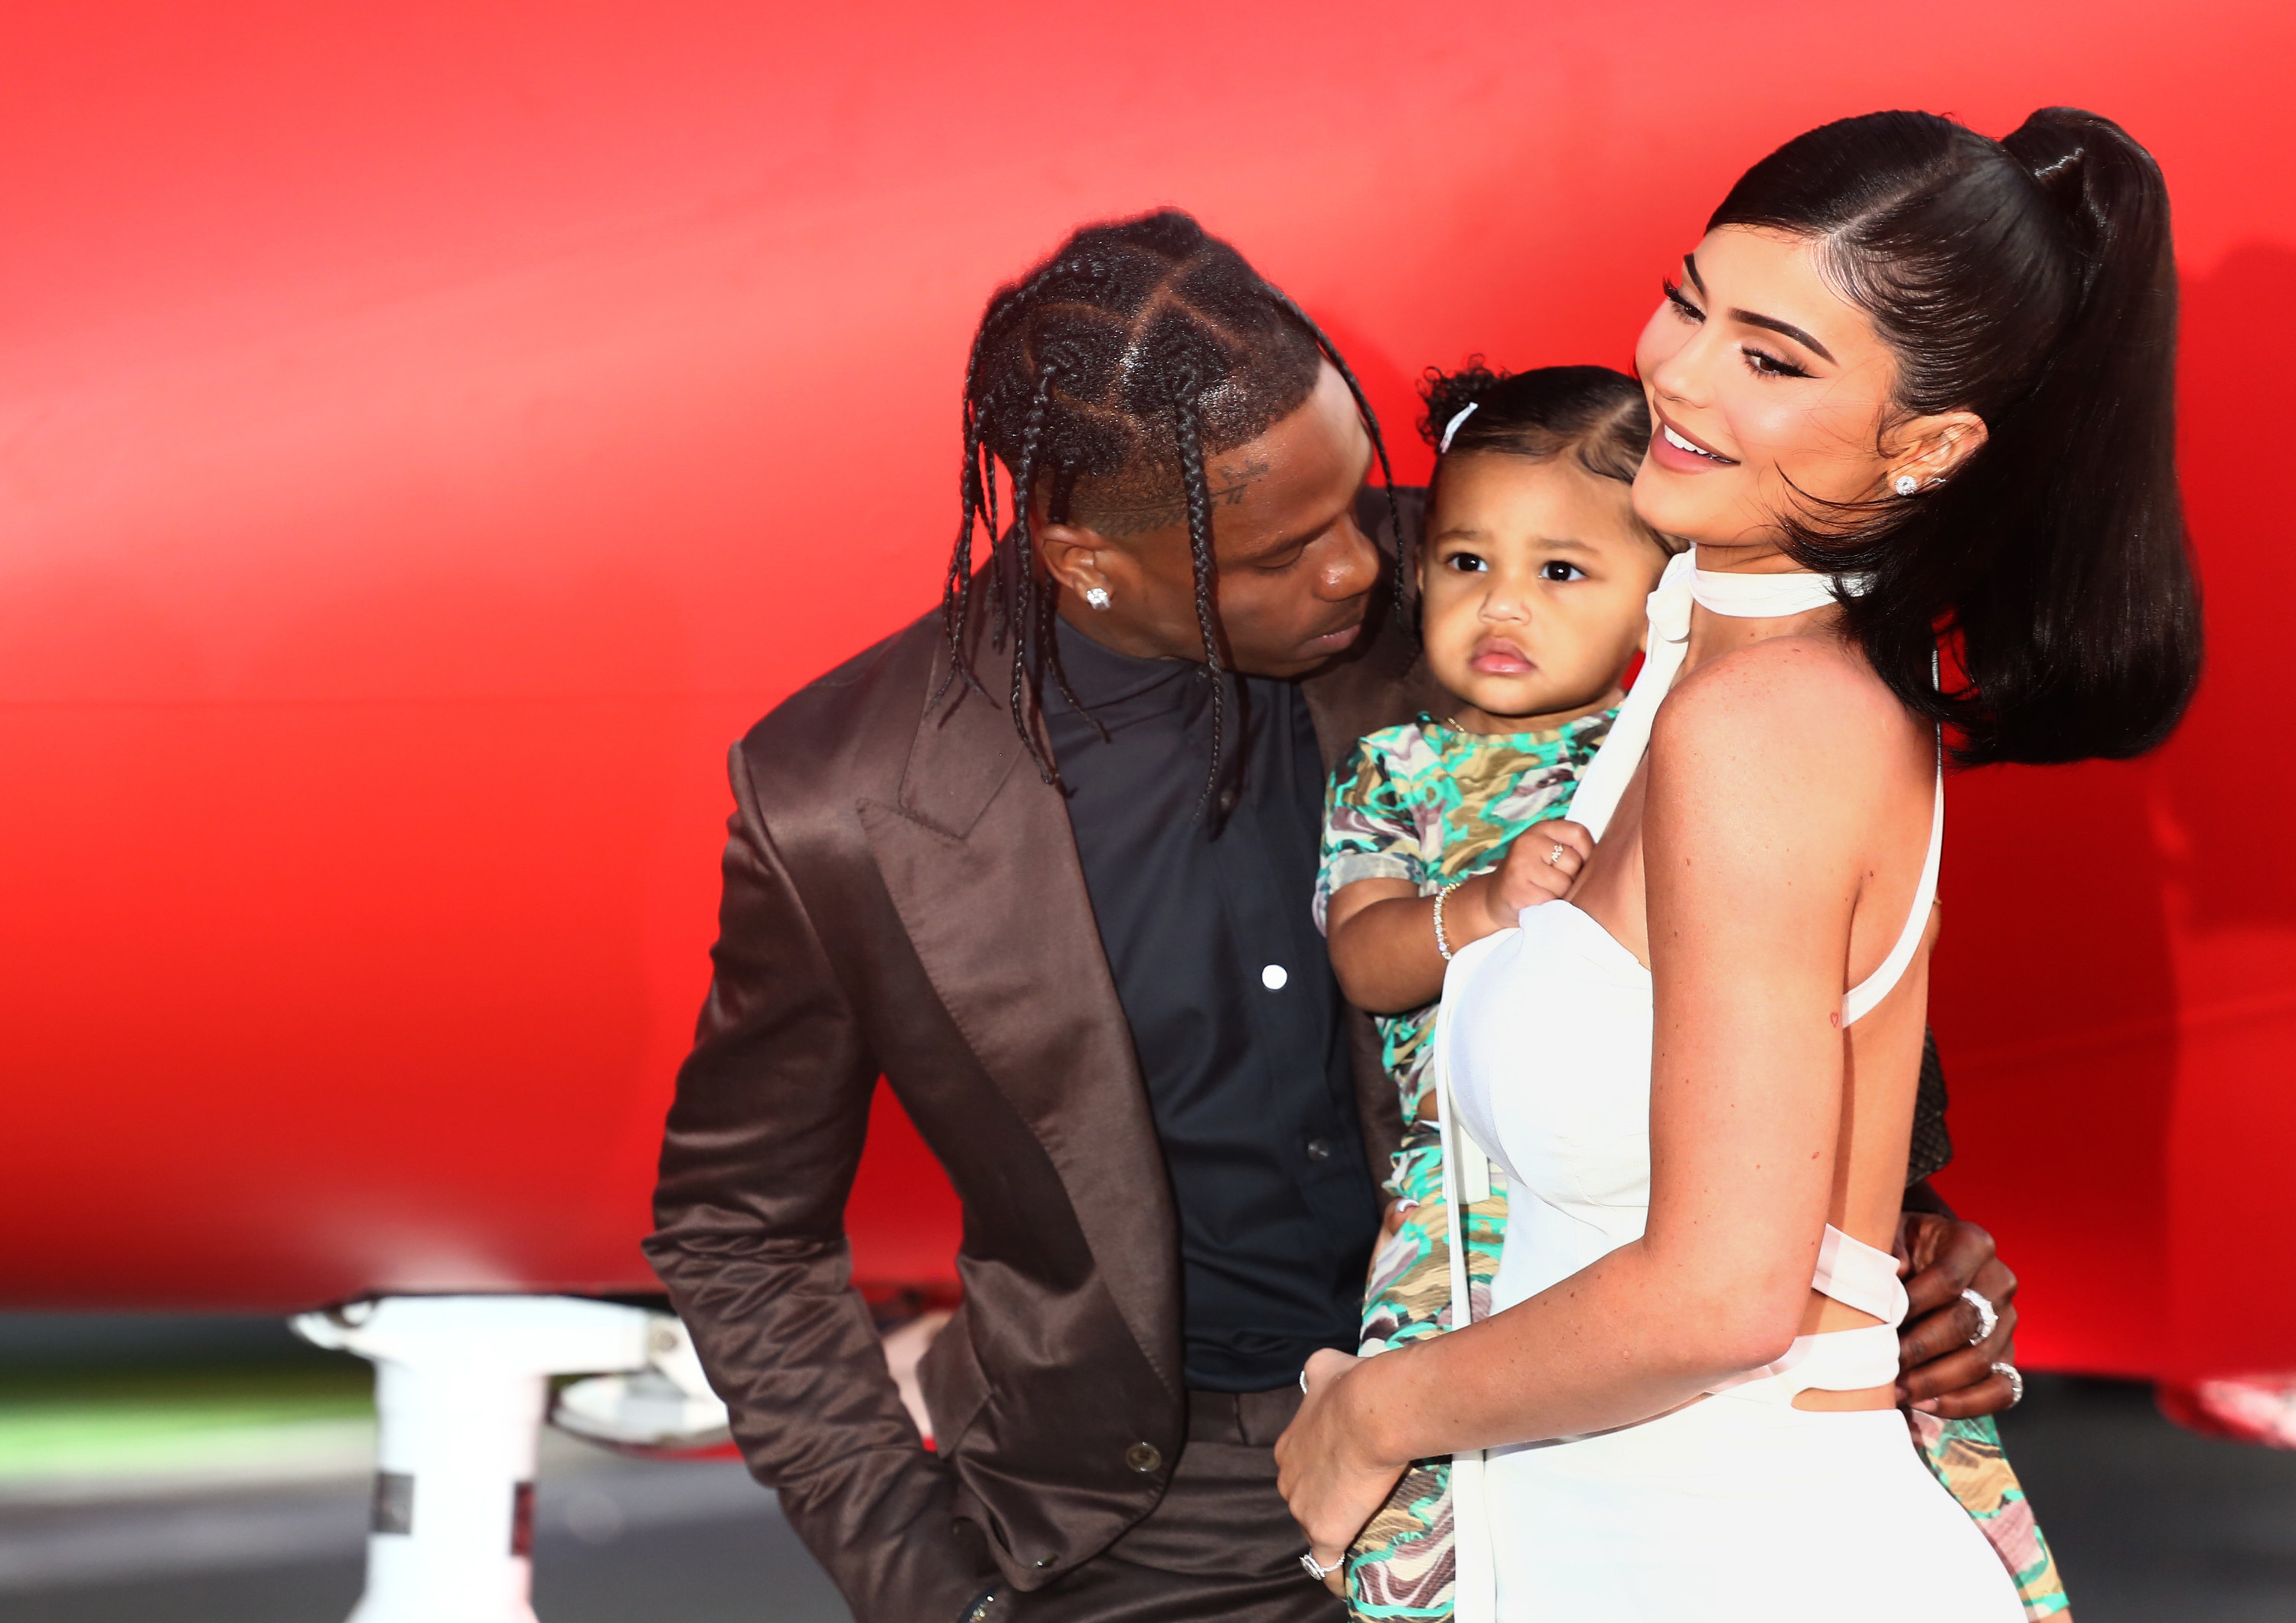 Travis and Kylie with their daughter